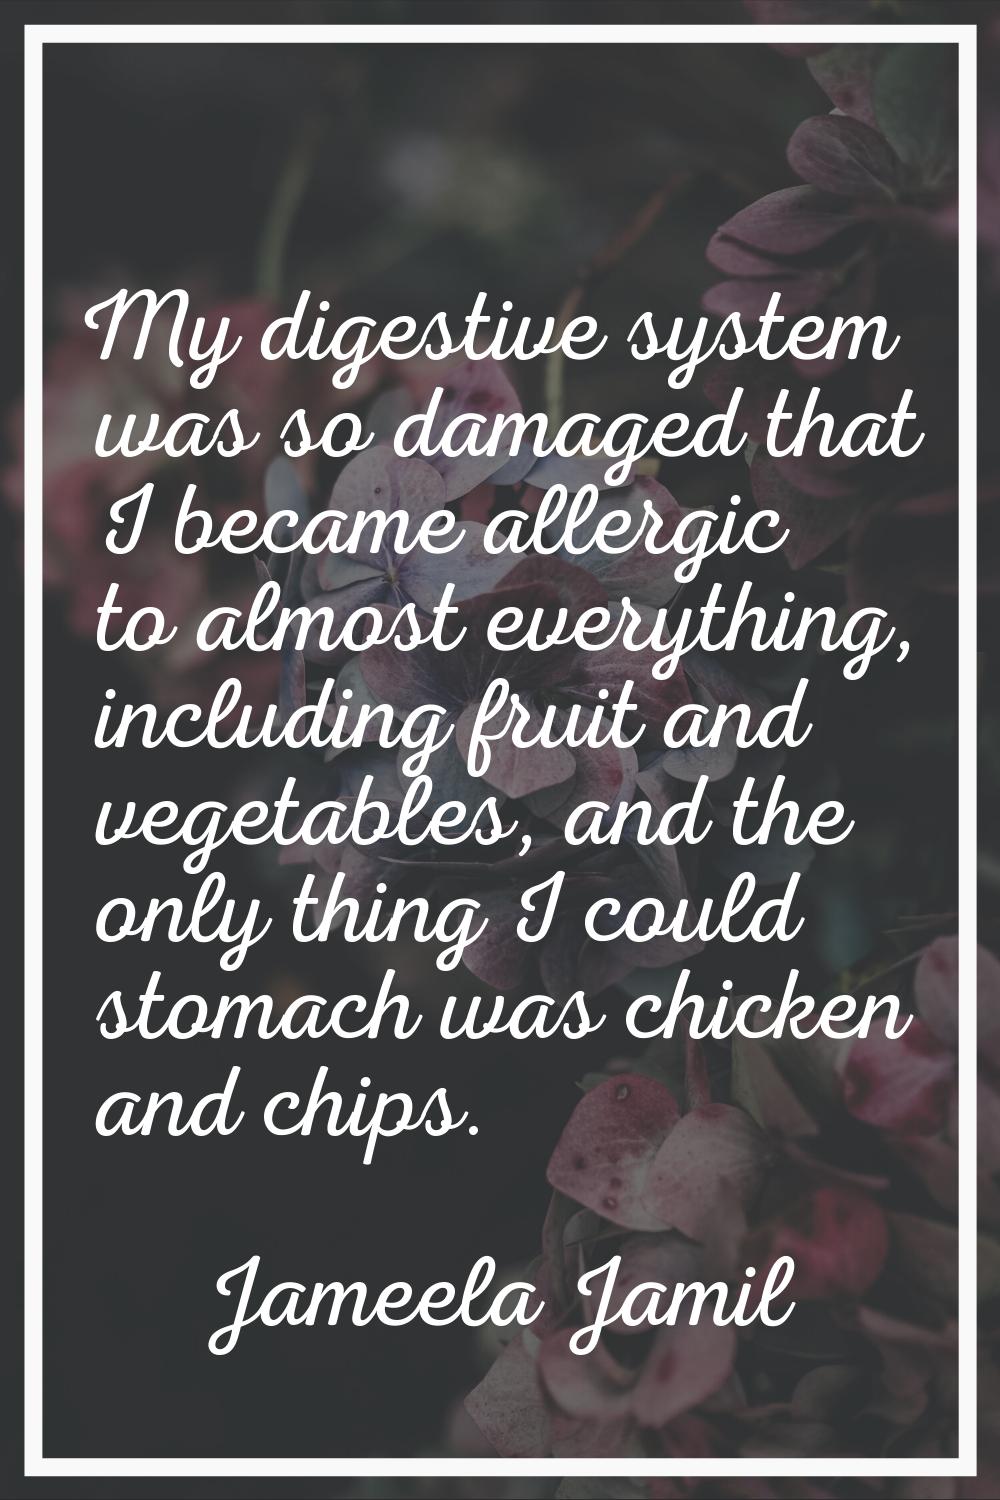 My digestive system was so damaged that I became allergic to almost everything, including fruit and